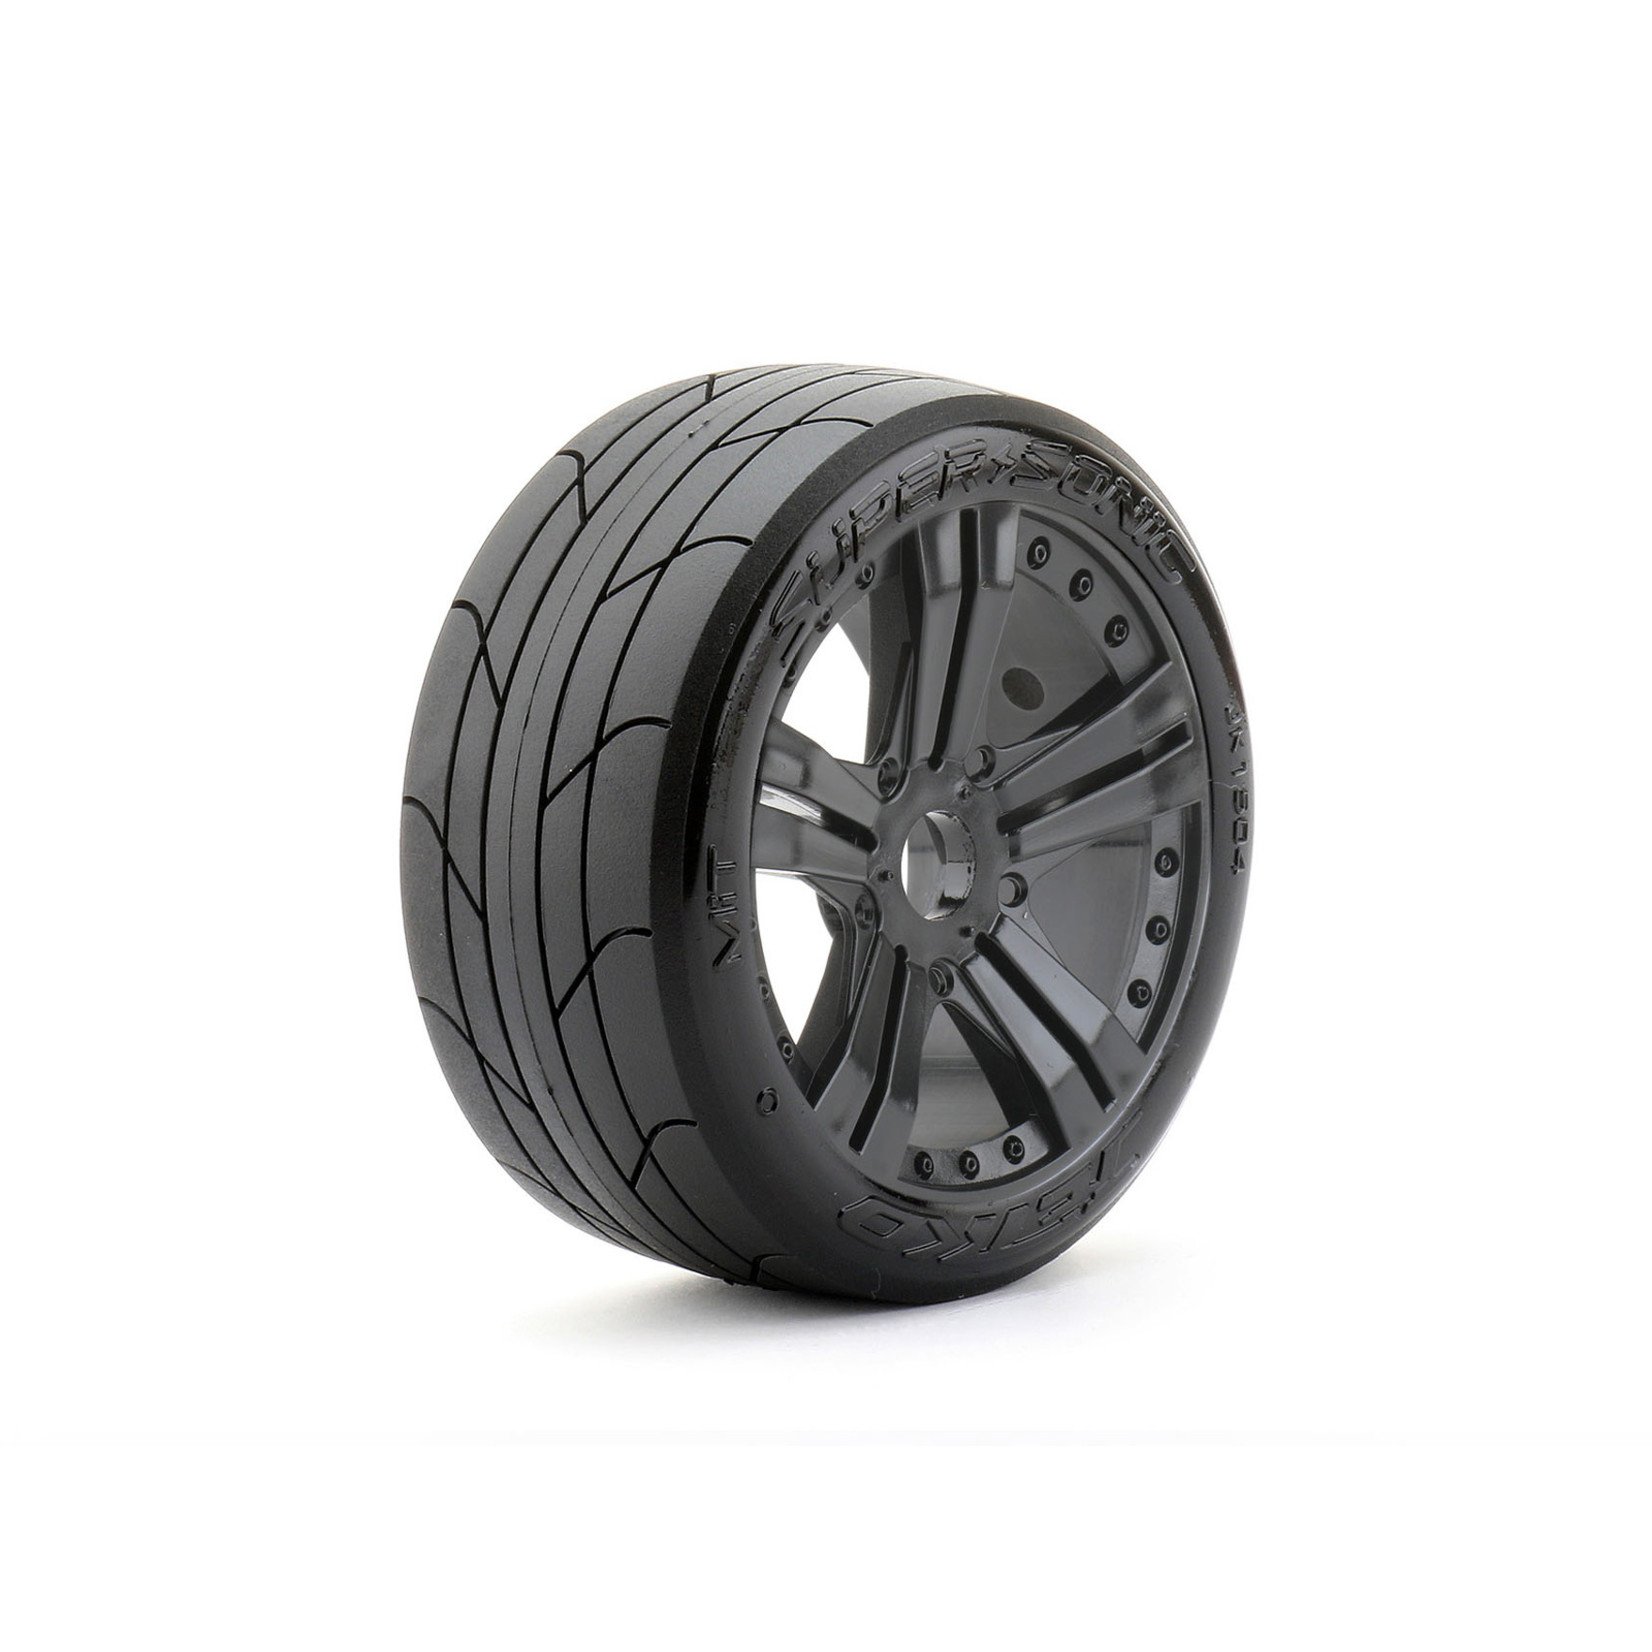 Jetko Tires JKO1504CBMSGB - 1/8 Buggy Super Sonic Tires Mounted on Black Claw Rims,